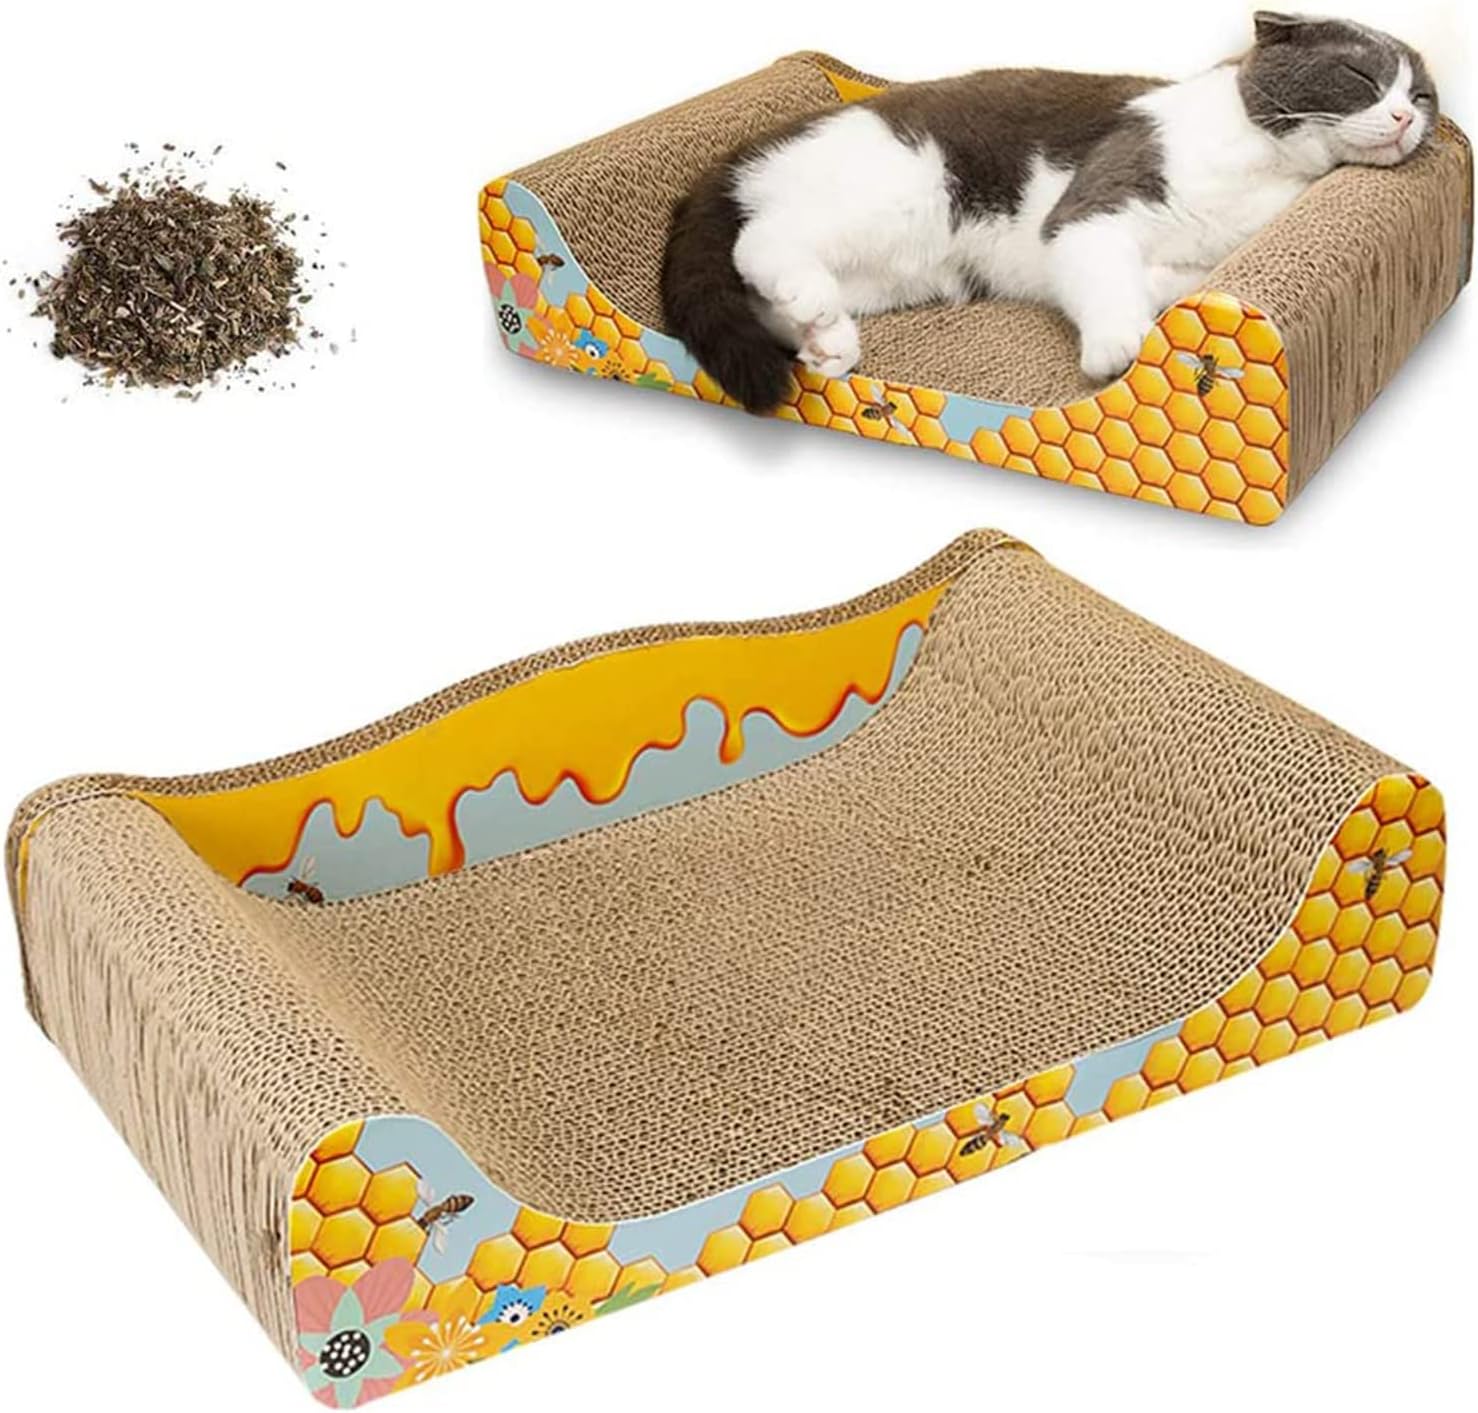 Innolv scratcher cardboard lounge couch sofa bed